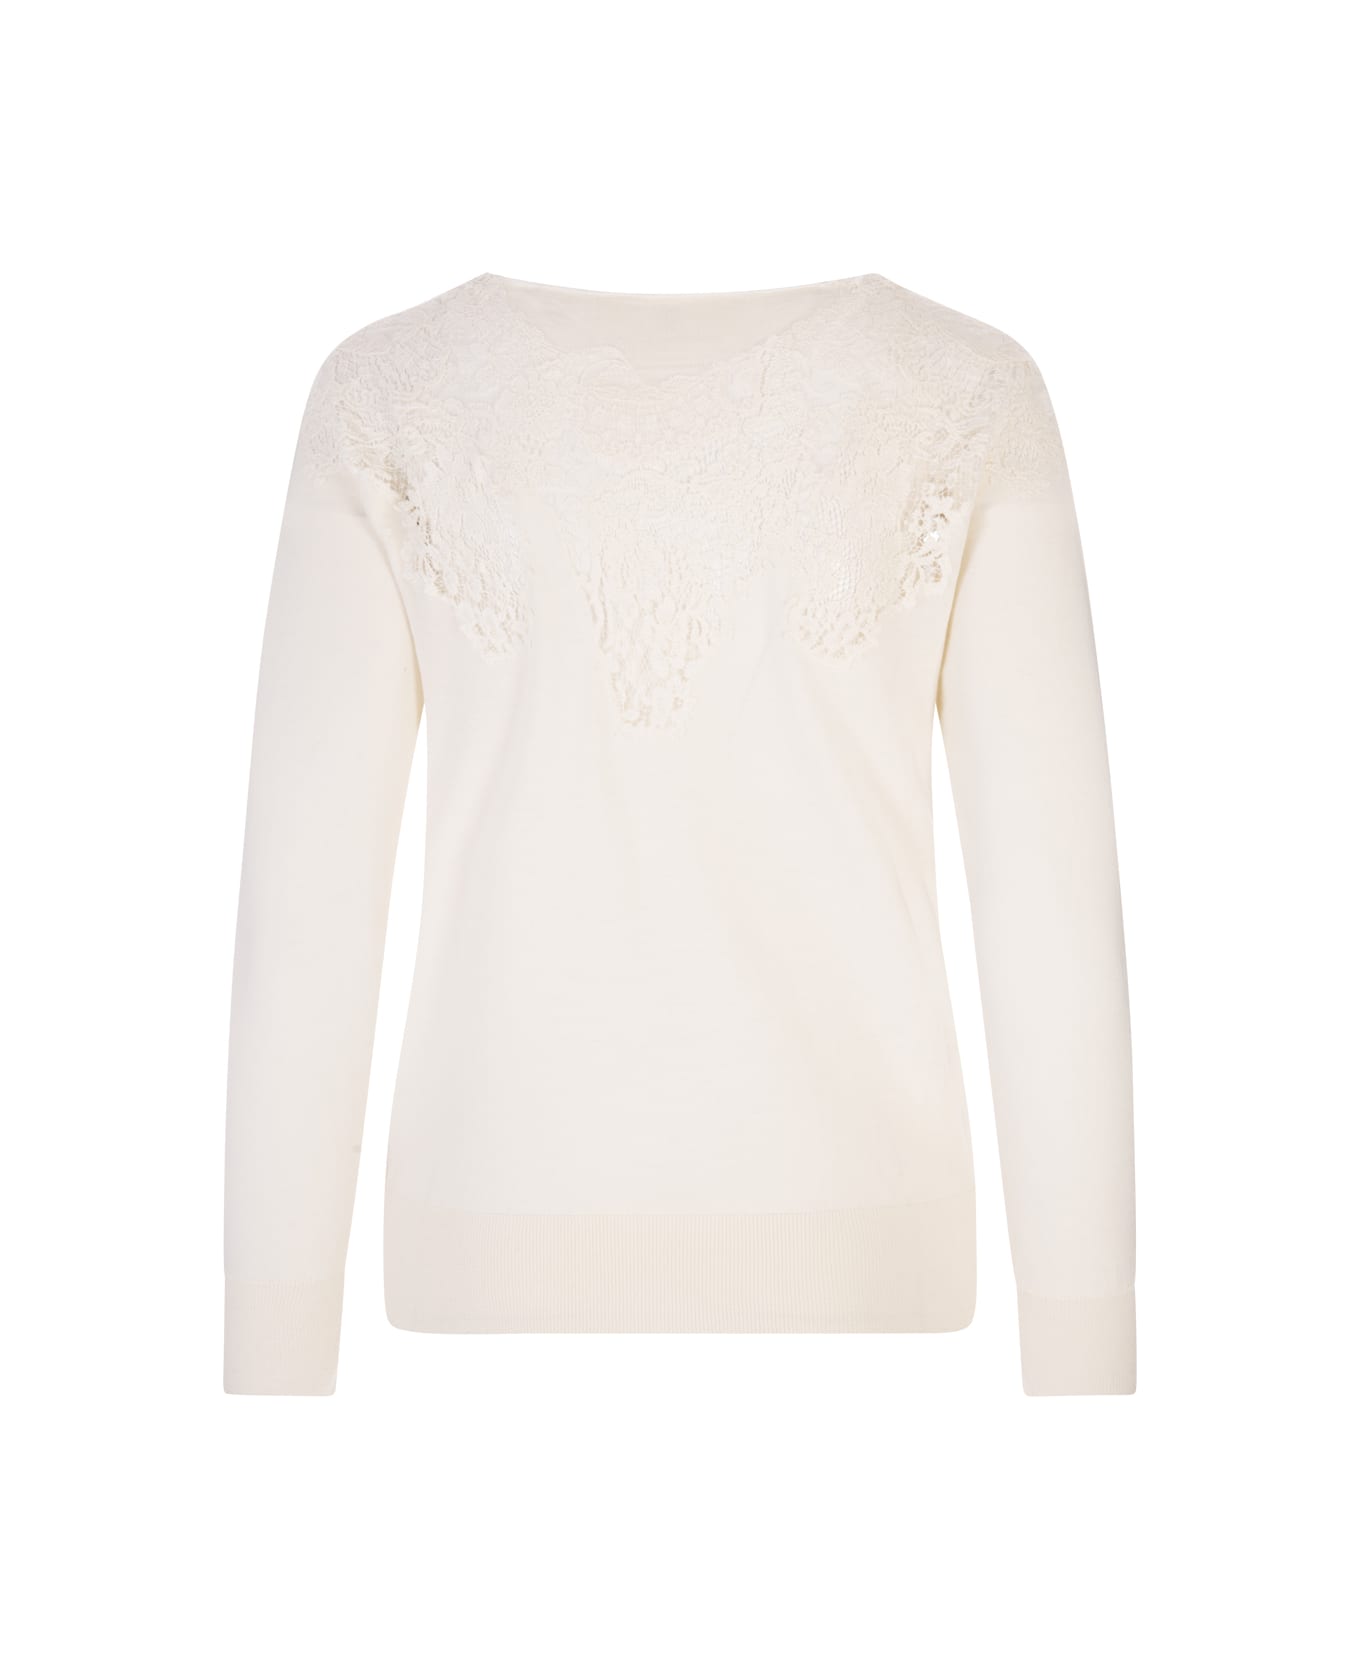 Ermanno Scervino White Wool Sweater With Lace Applications - Bianco